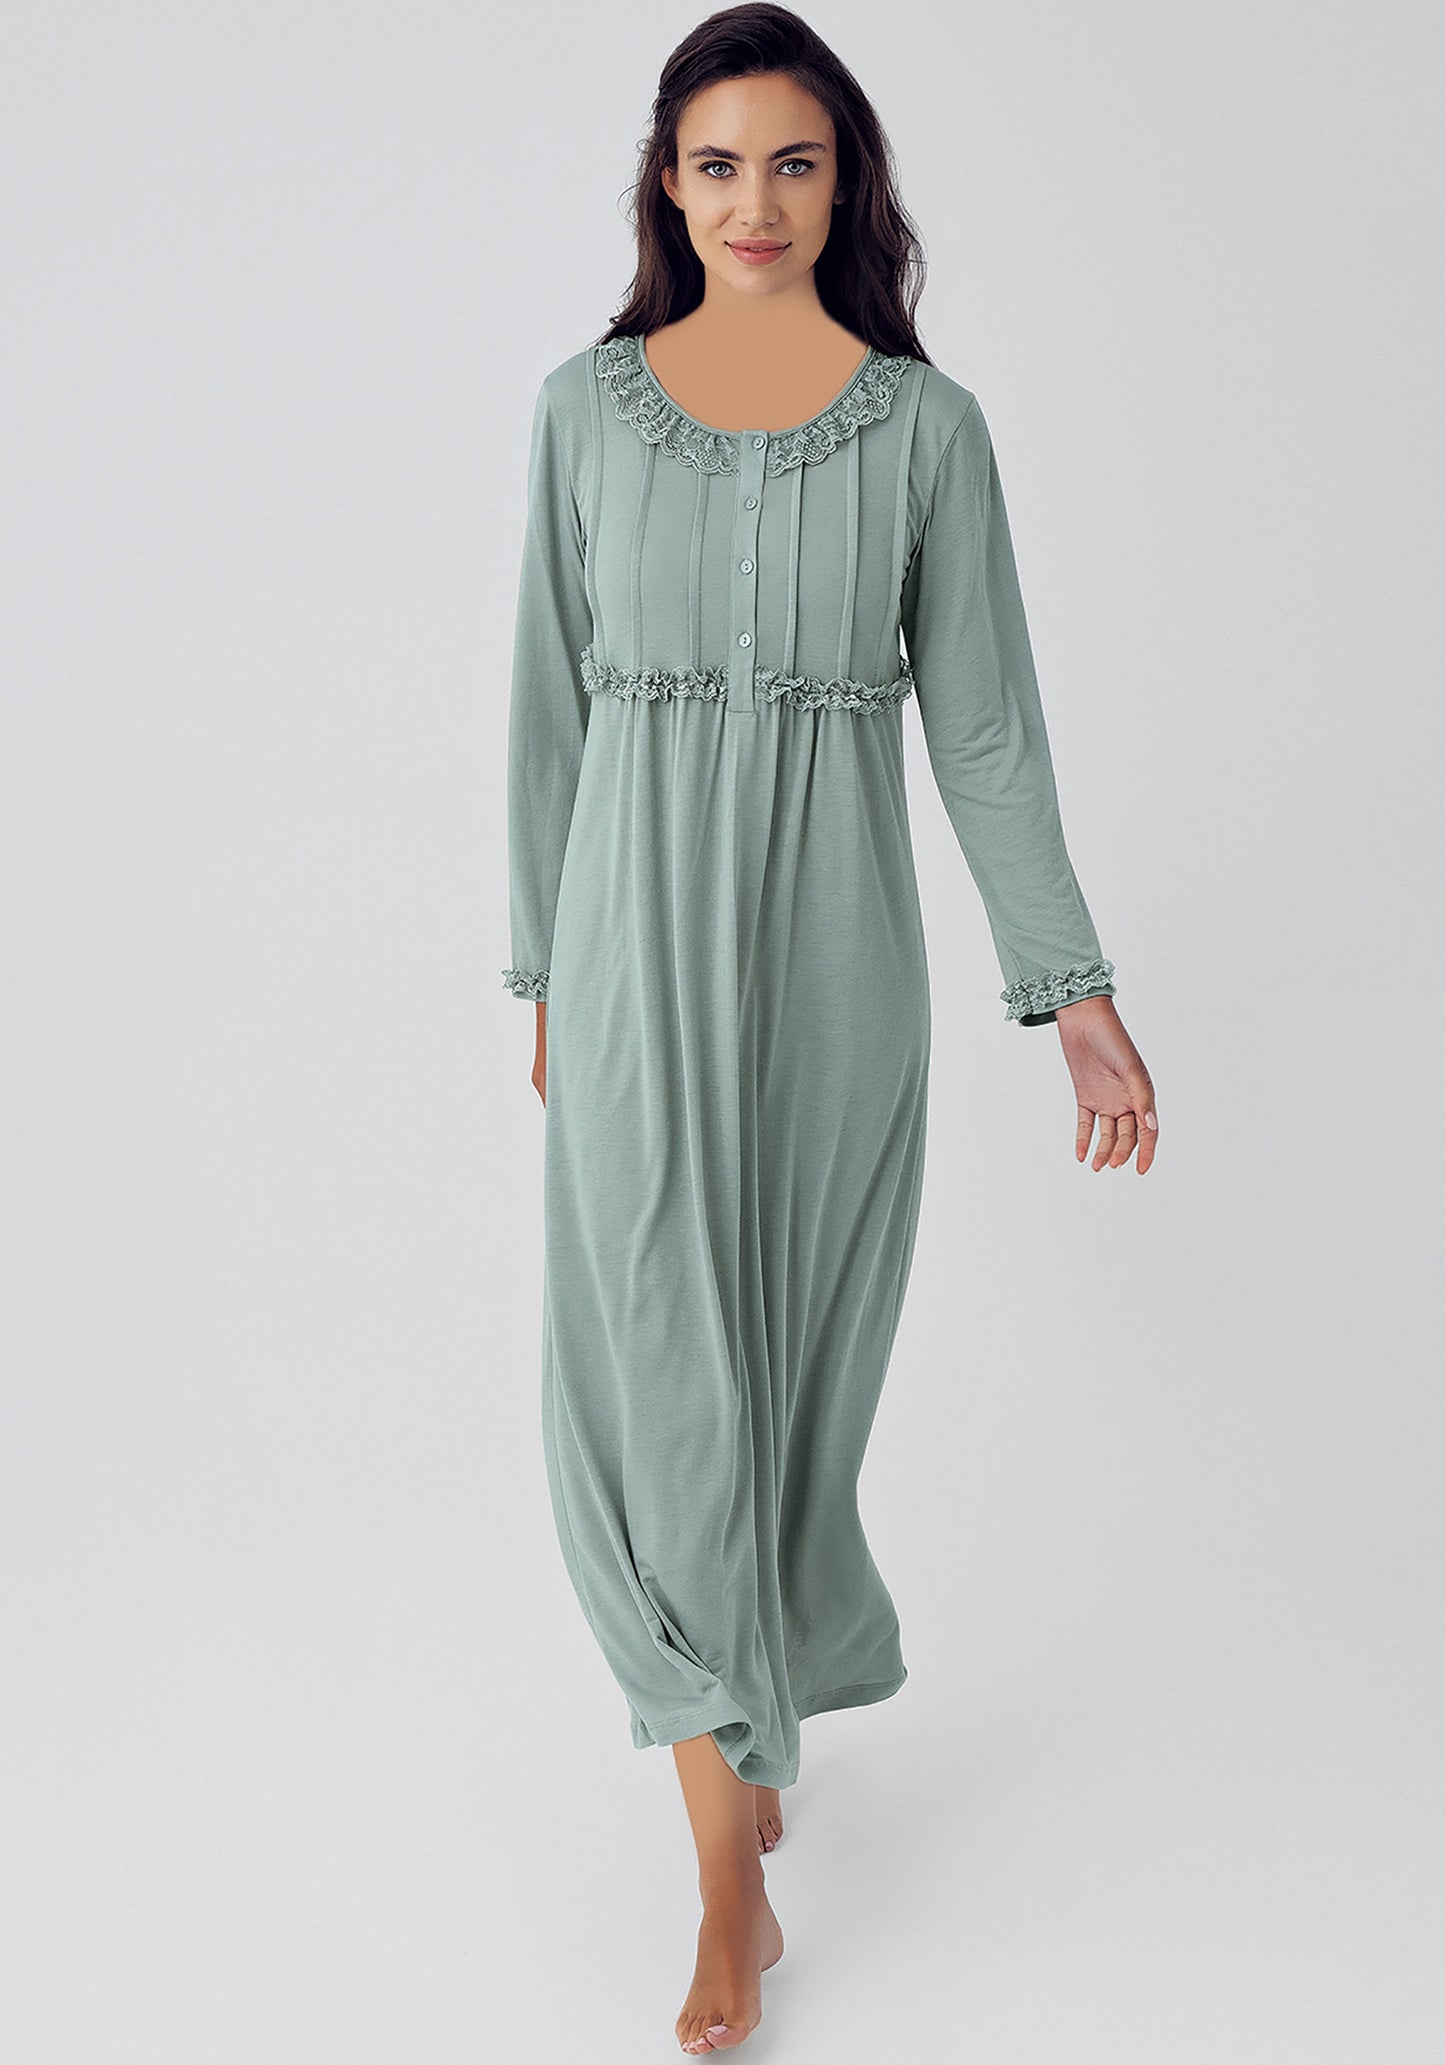 S&L Night Gown